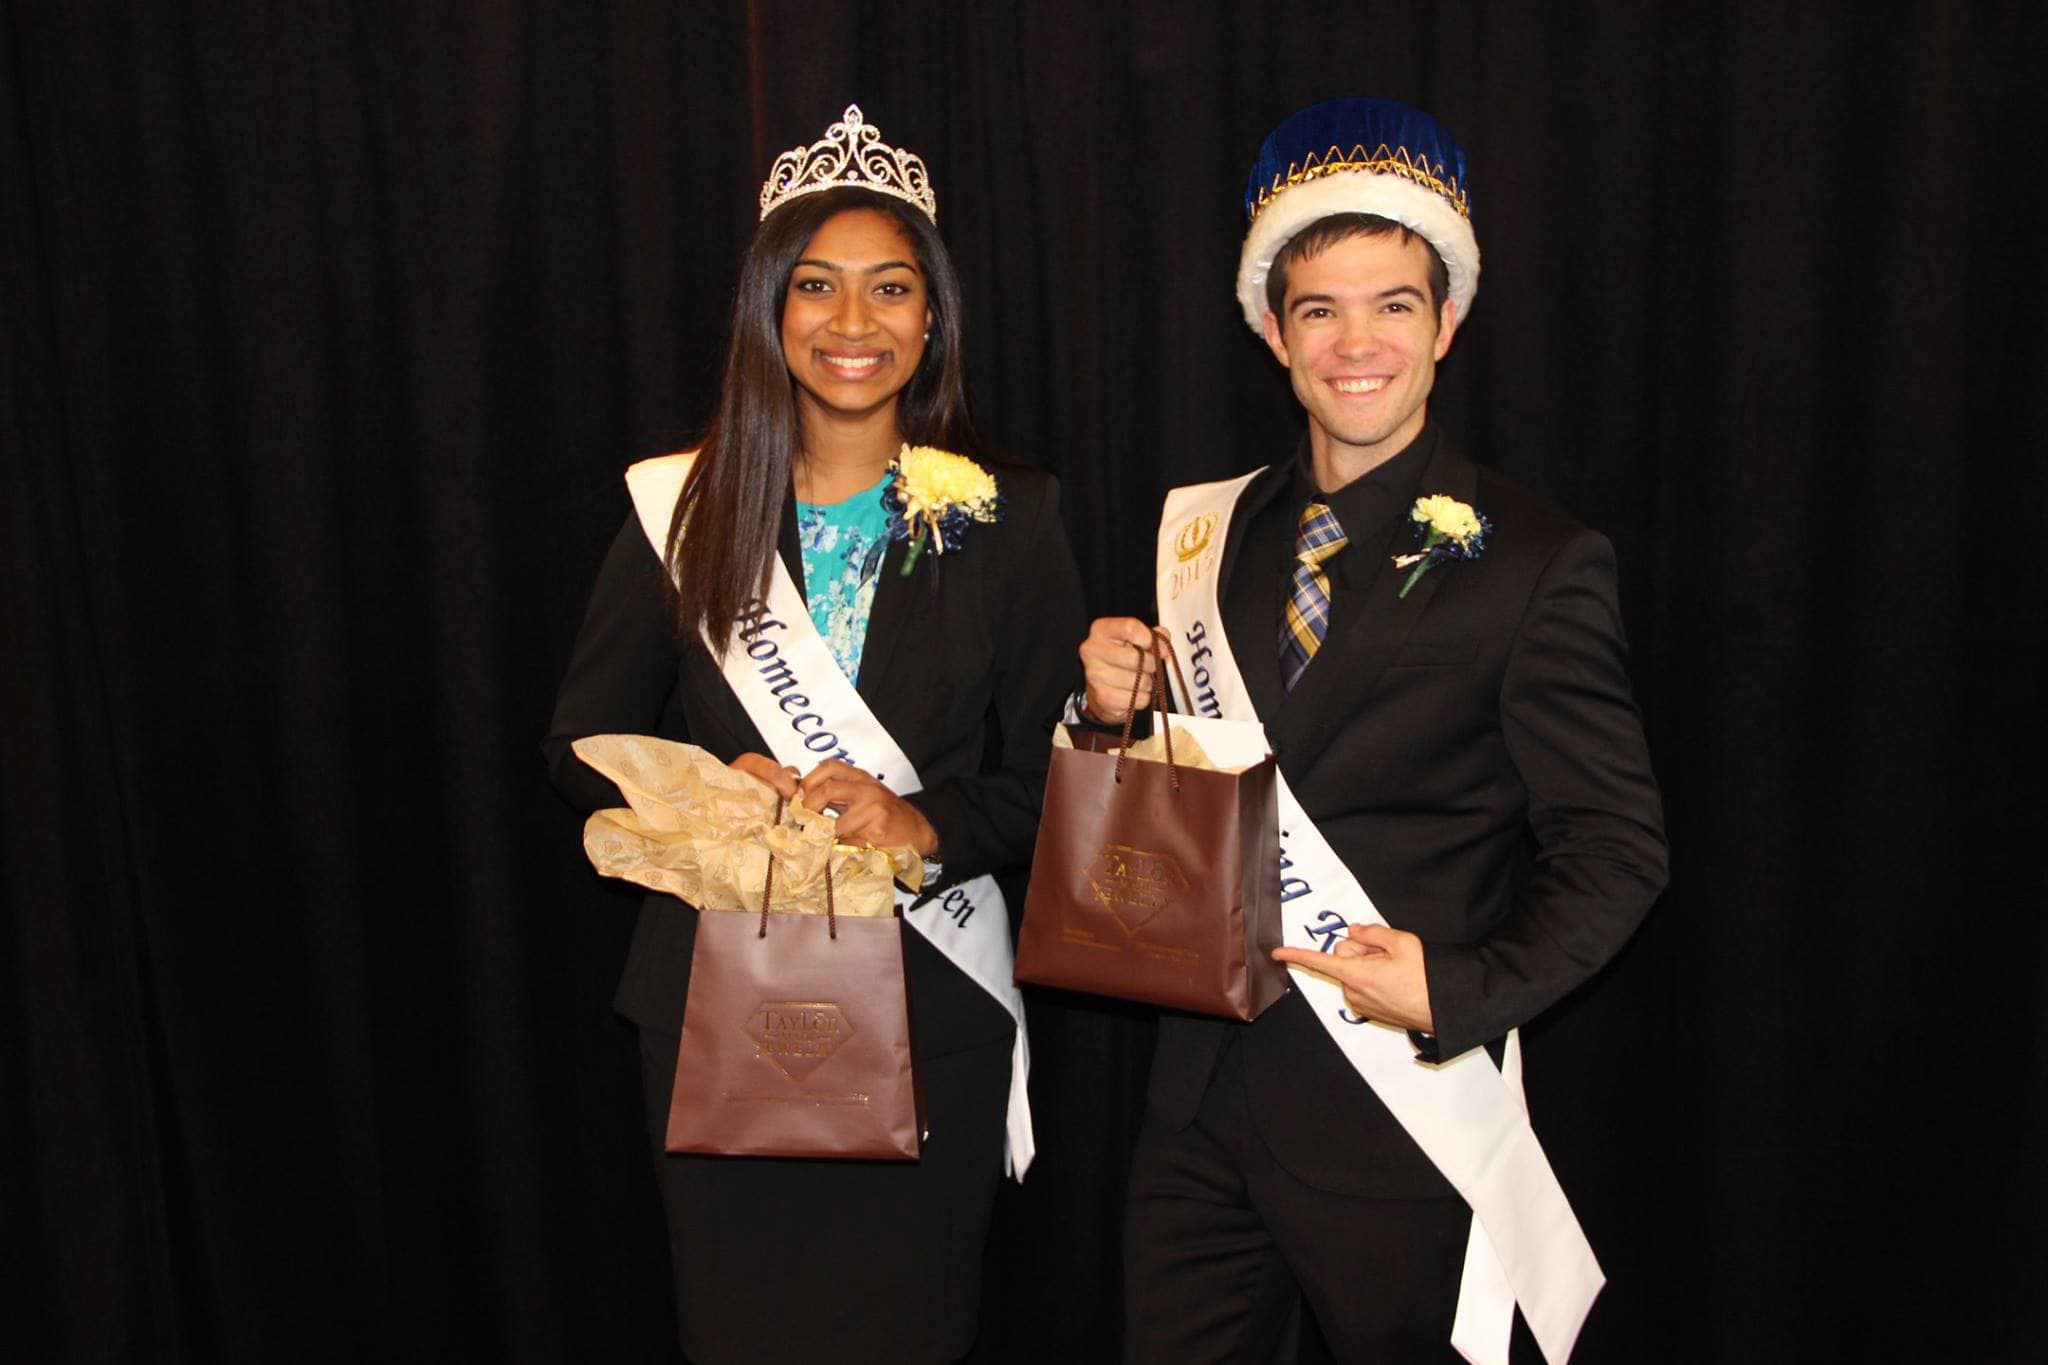 Homecoming King and Queen posing with gifts sponsored by TMJ